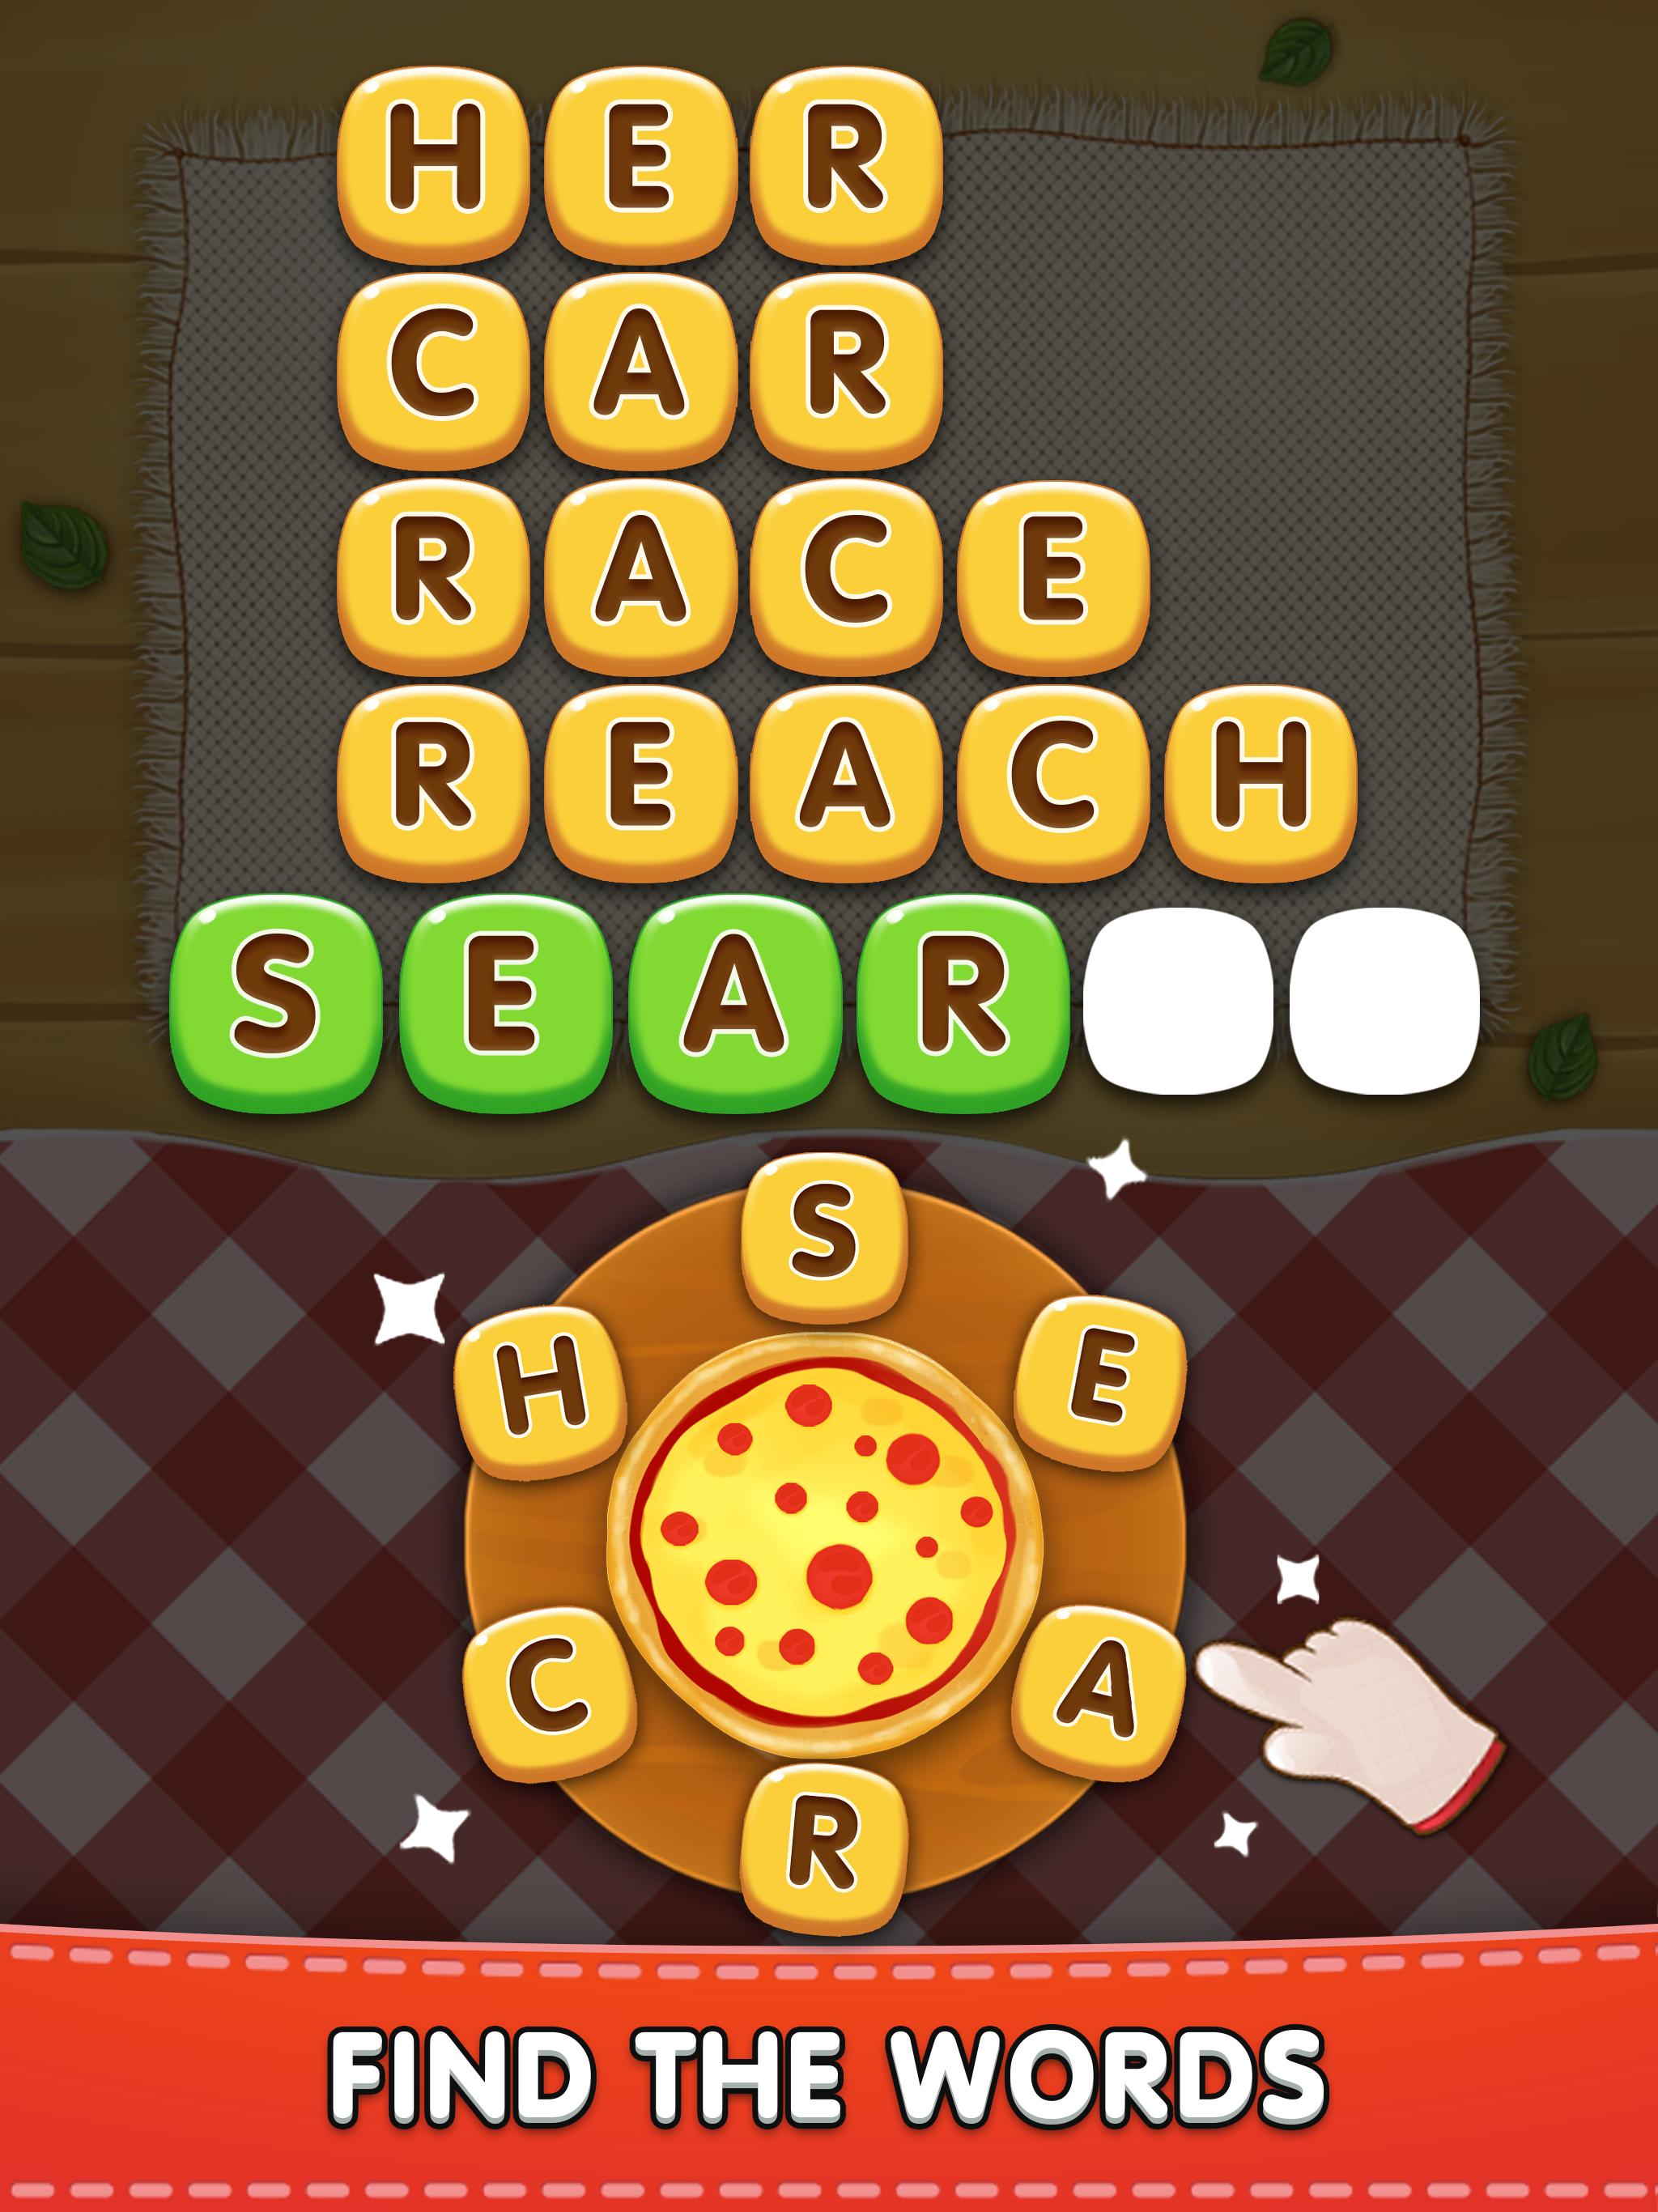 Word Pizza Word Games Puzzles 2.2.11 Screenshot 11